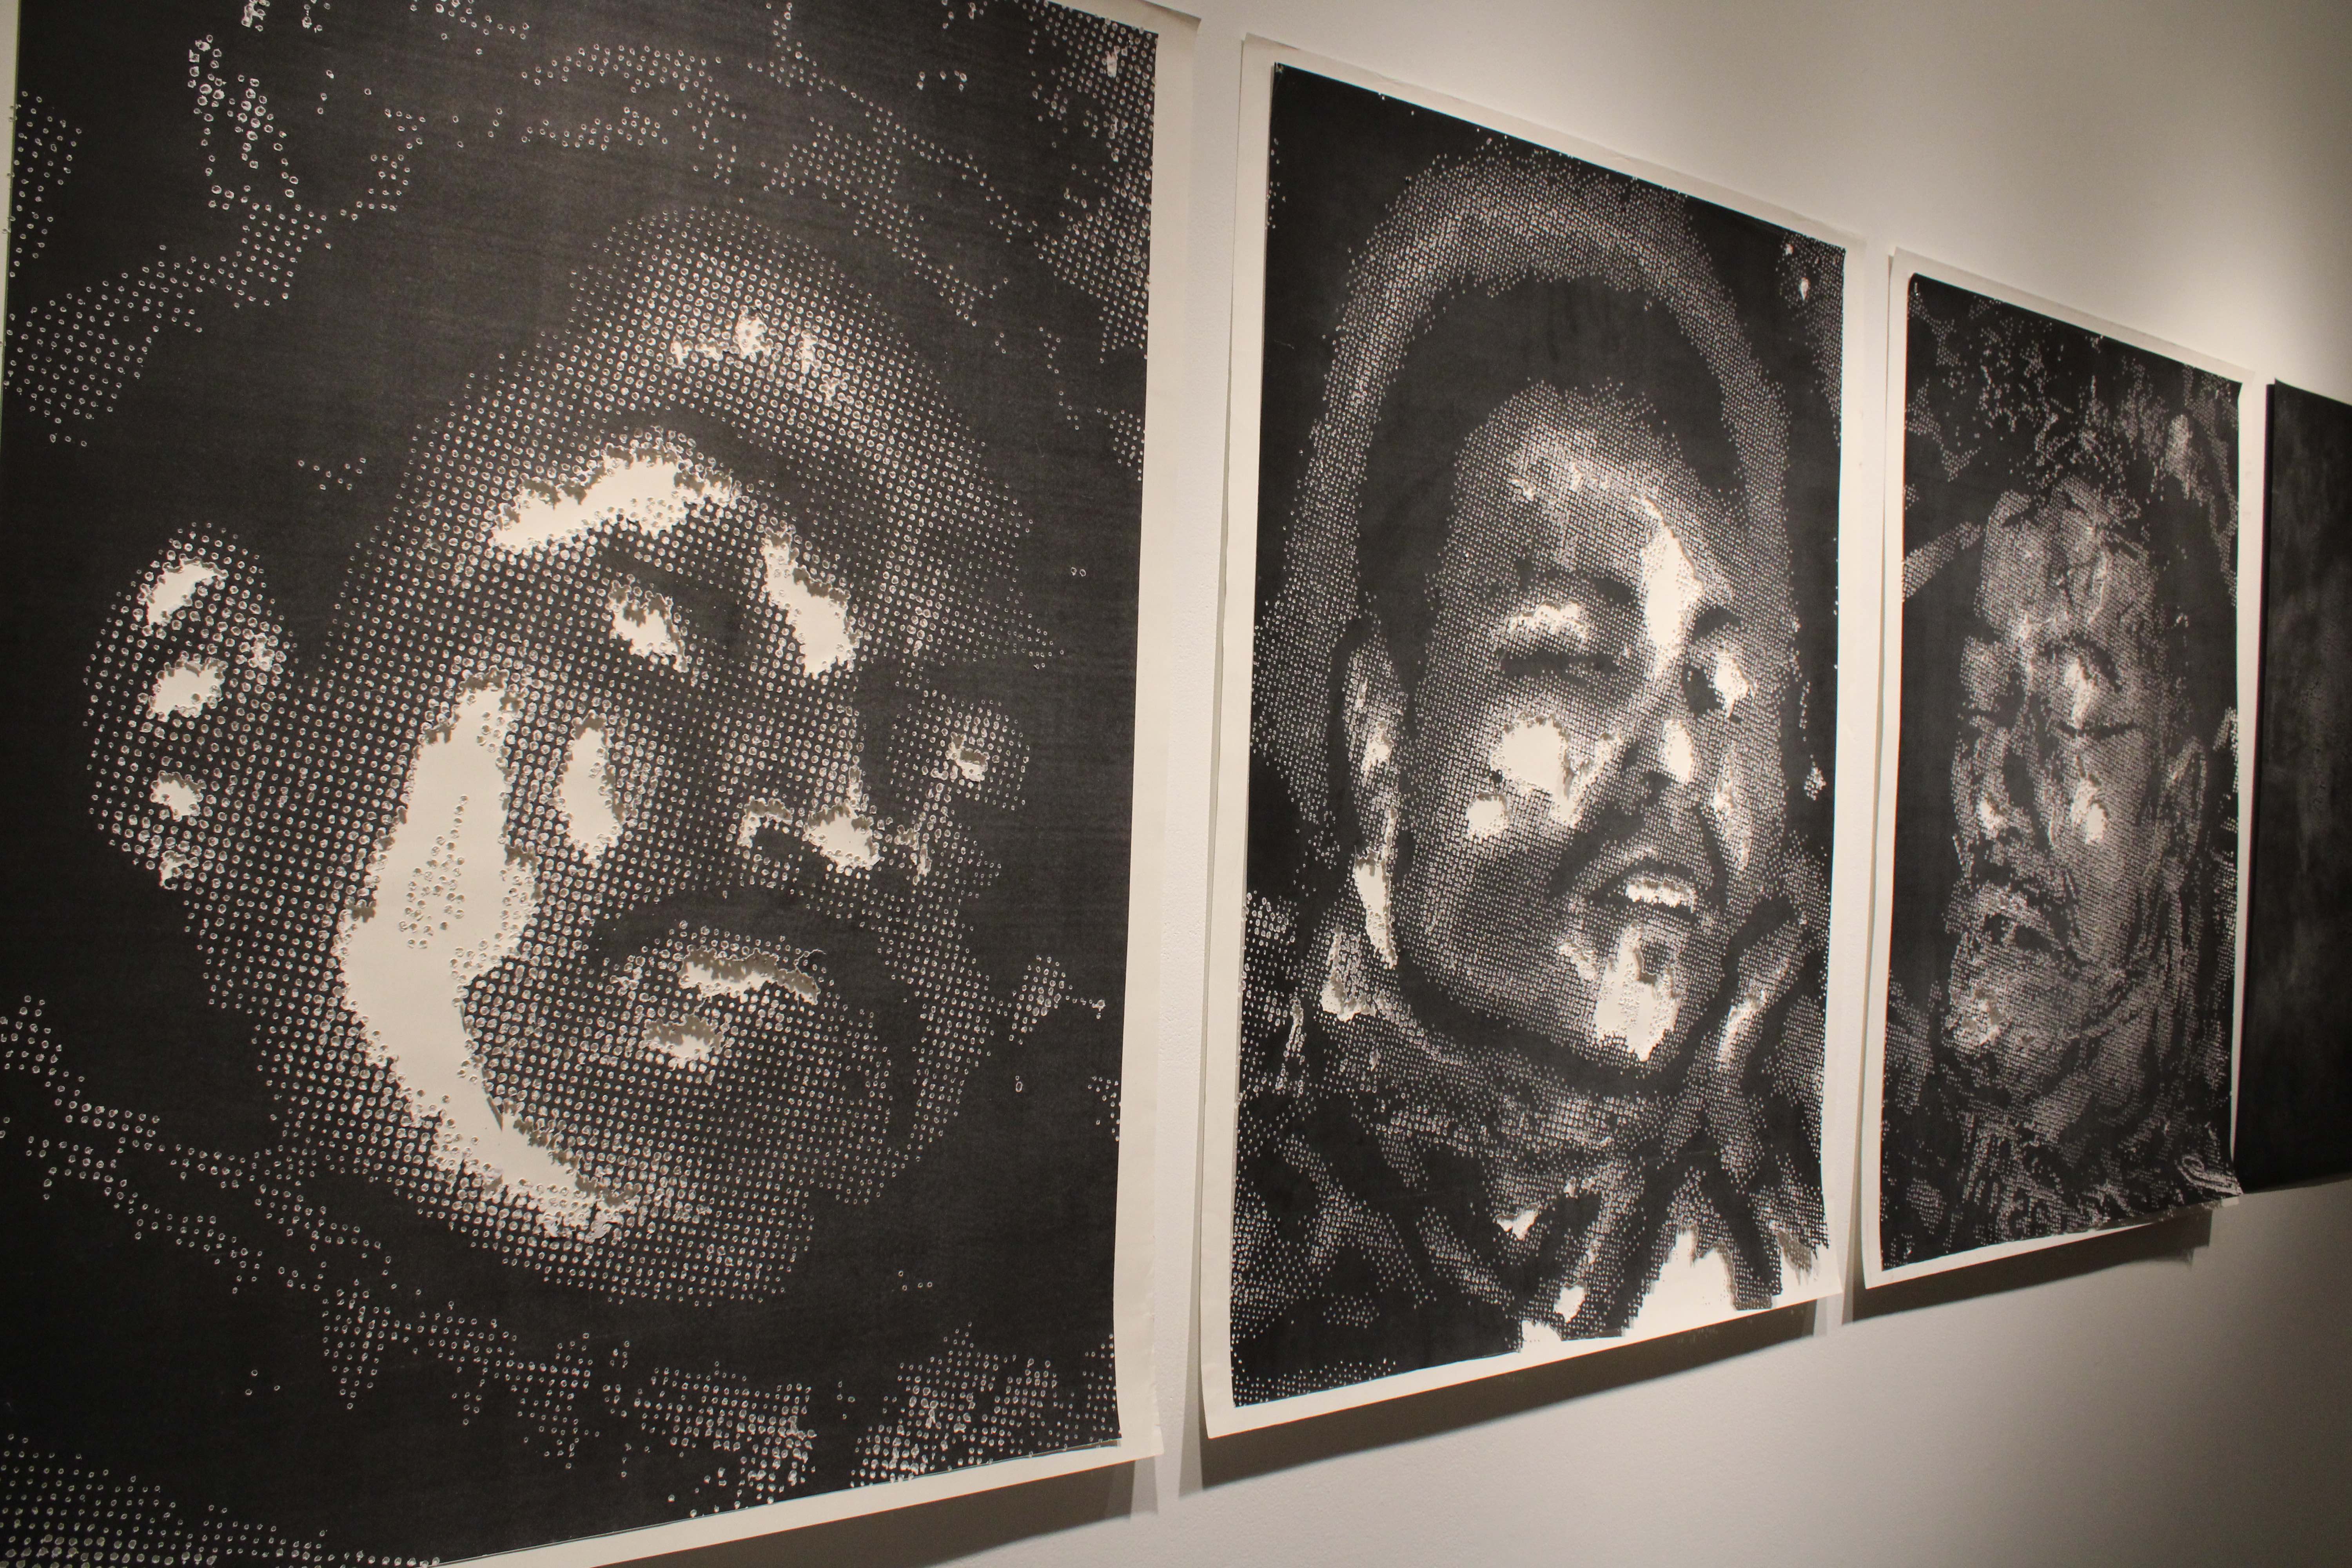 On display at The Print Center in Philadelphia through March 21, an exhibition from Miguel Aragón explores the limits of documenting violence by depicting homicide victims in Ciudad Juárez. Photo: Emily Neil / AL DÍA News 